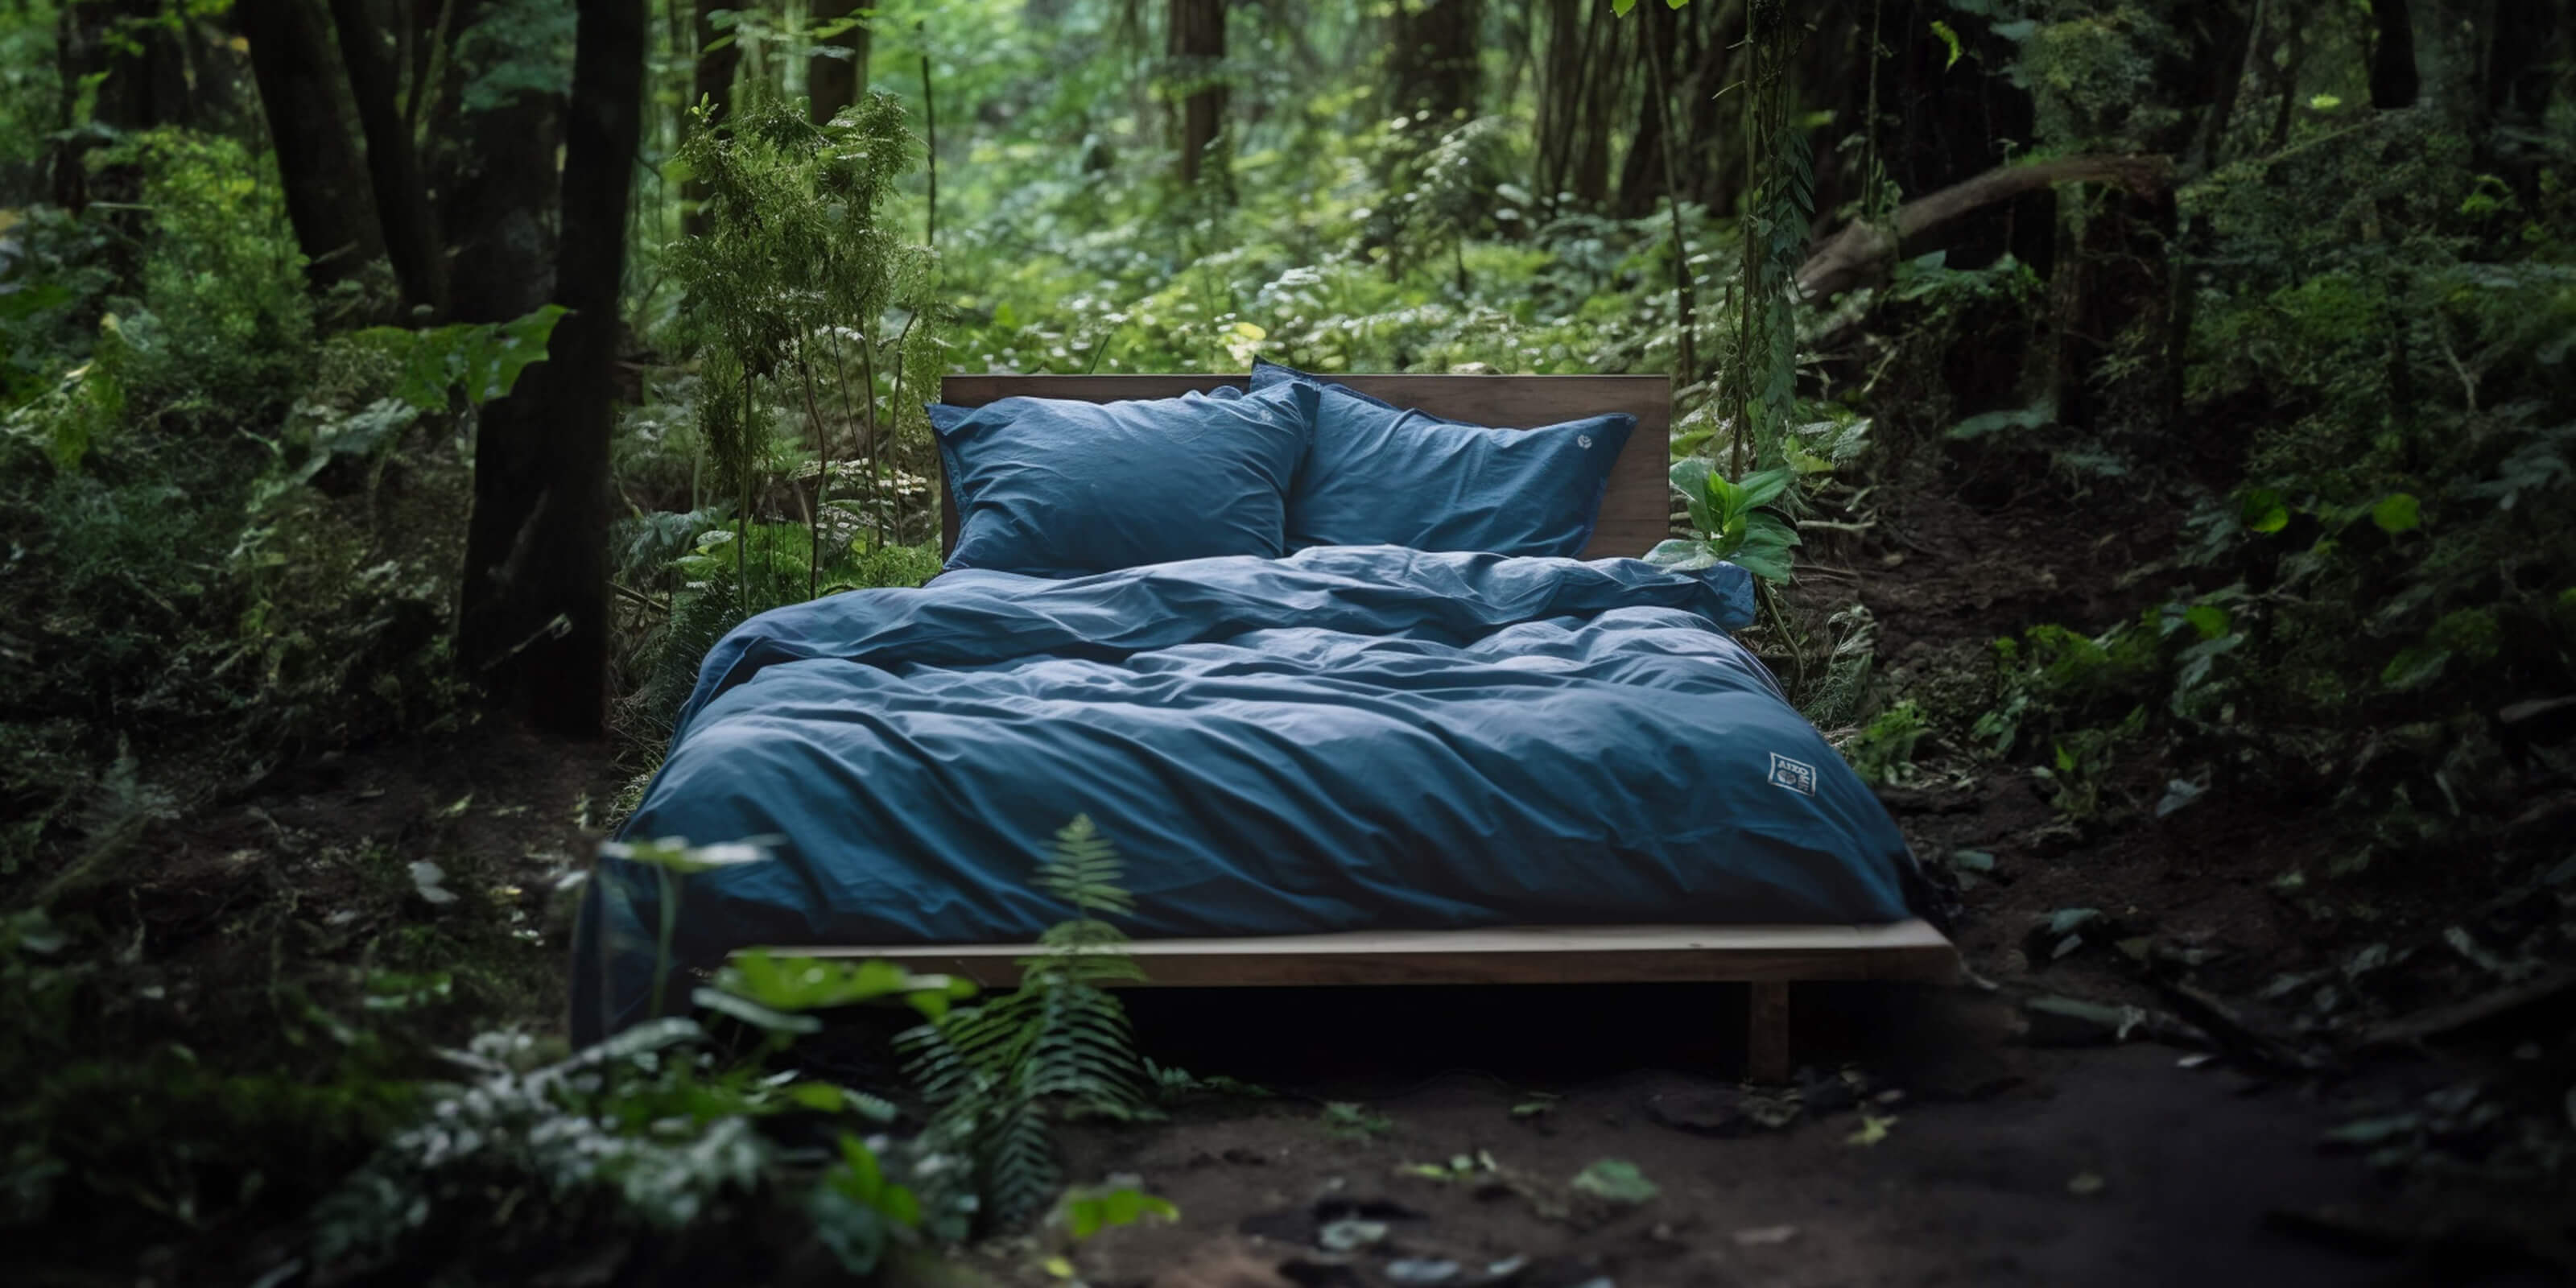 A cozy looking bed with Aizome bedding is standing in the Forest